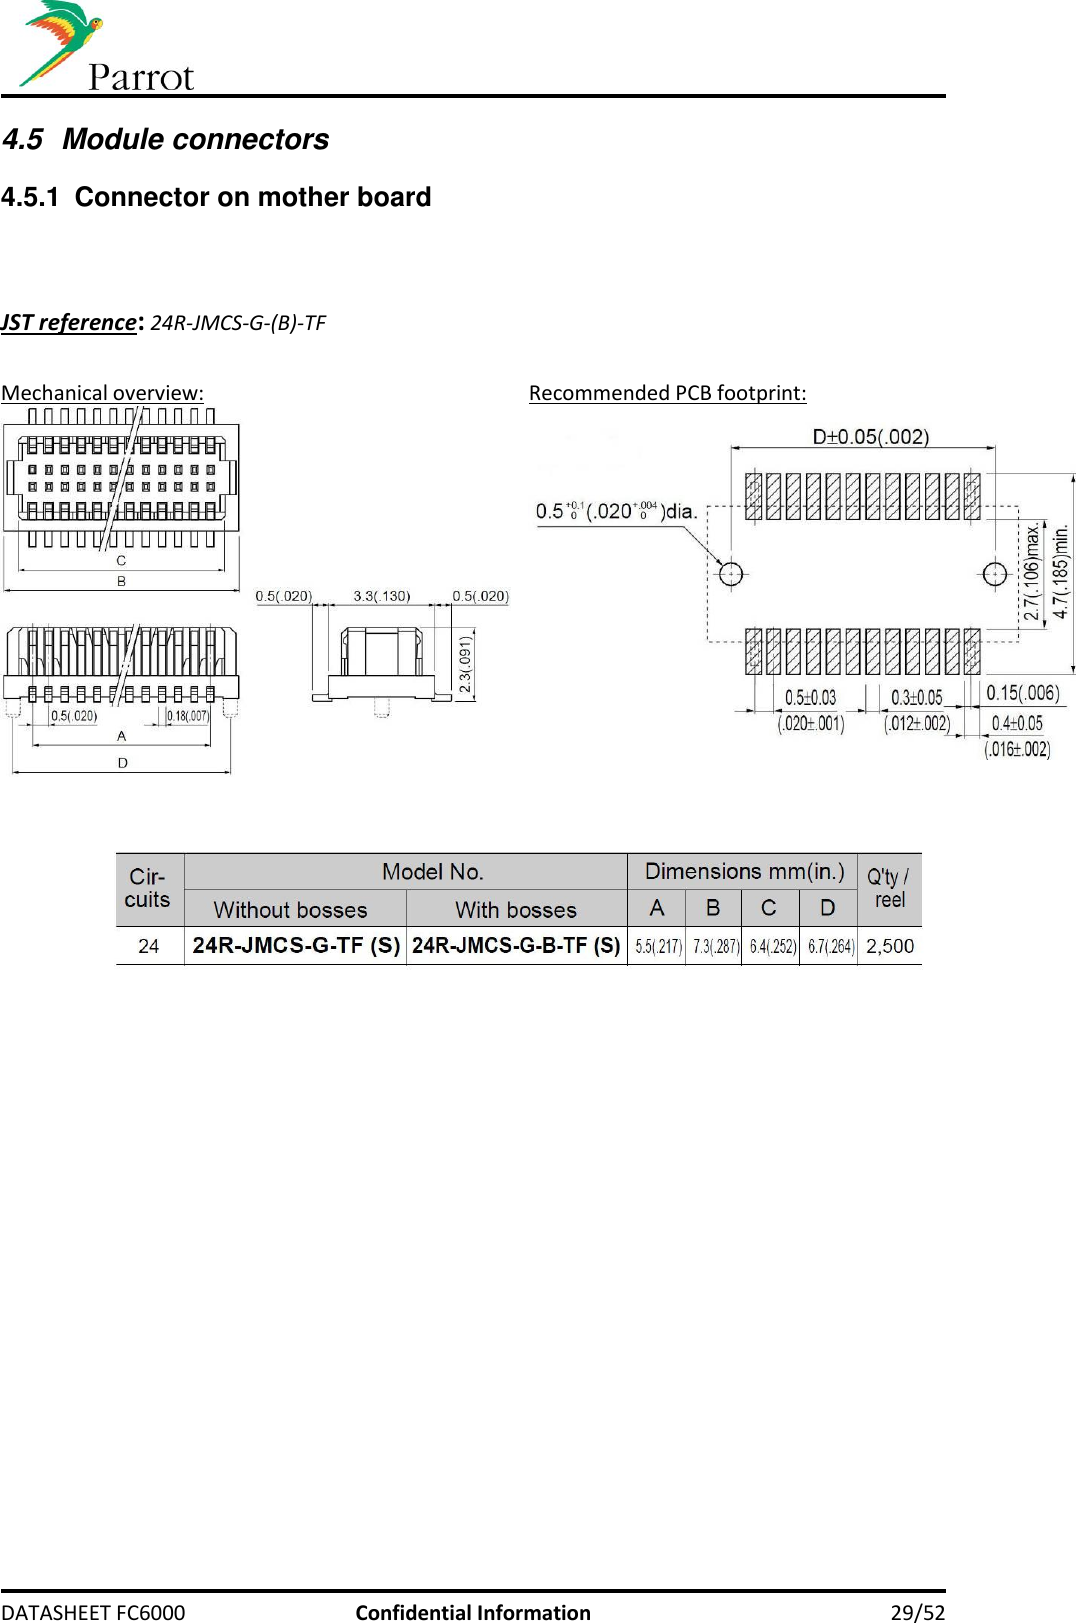     DATASHEET FC6000  Confidential Information 29/52 4.5  Module connectors 4.5.1  Connector on mother board    JST reference: 24R-JMCS-G-(B)-TF  Mechanical overview: Recommended PCB footprint:       